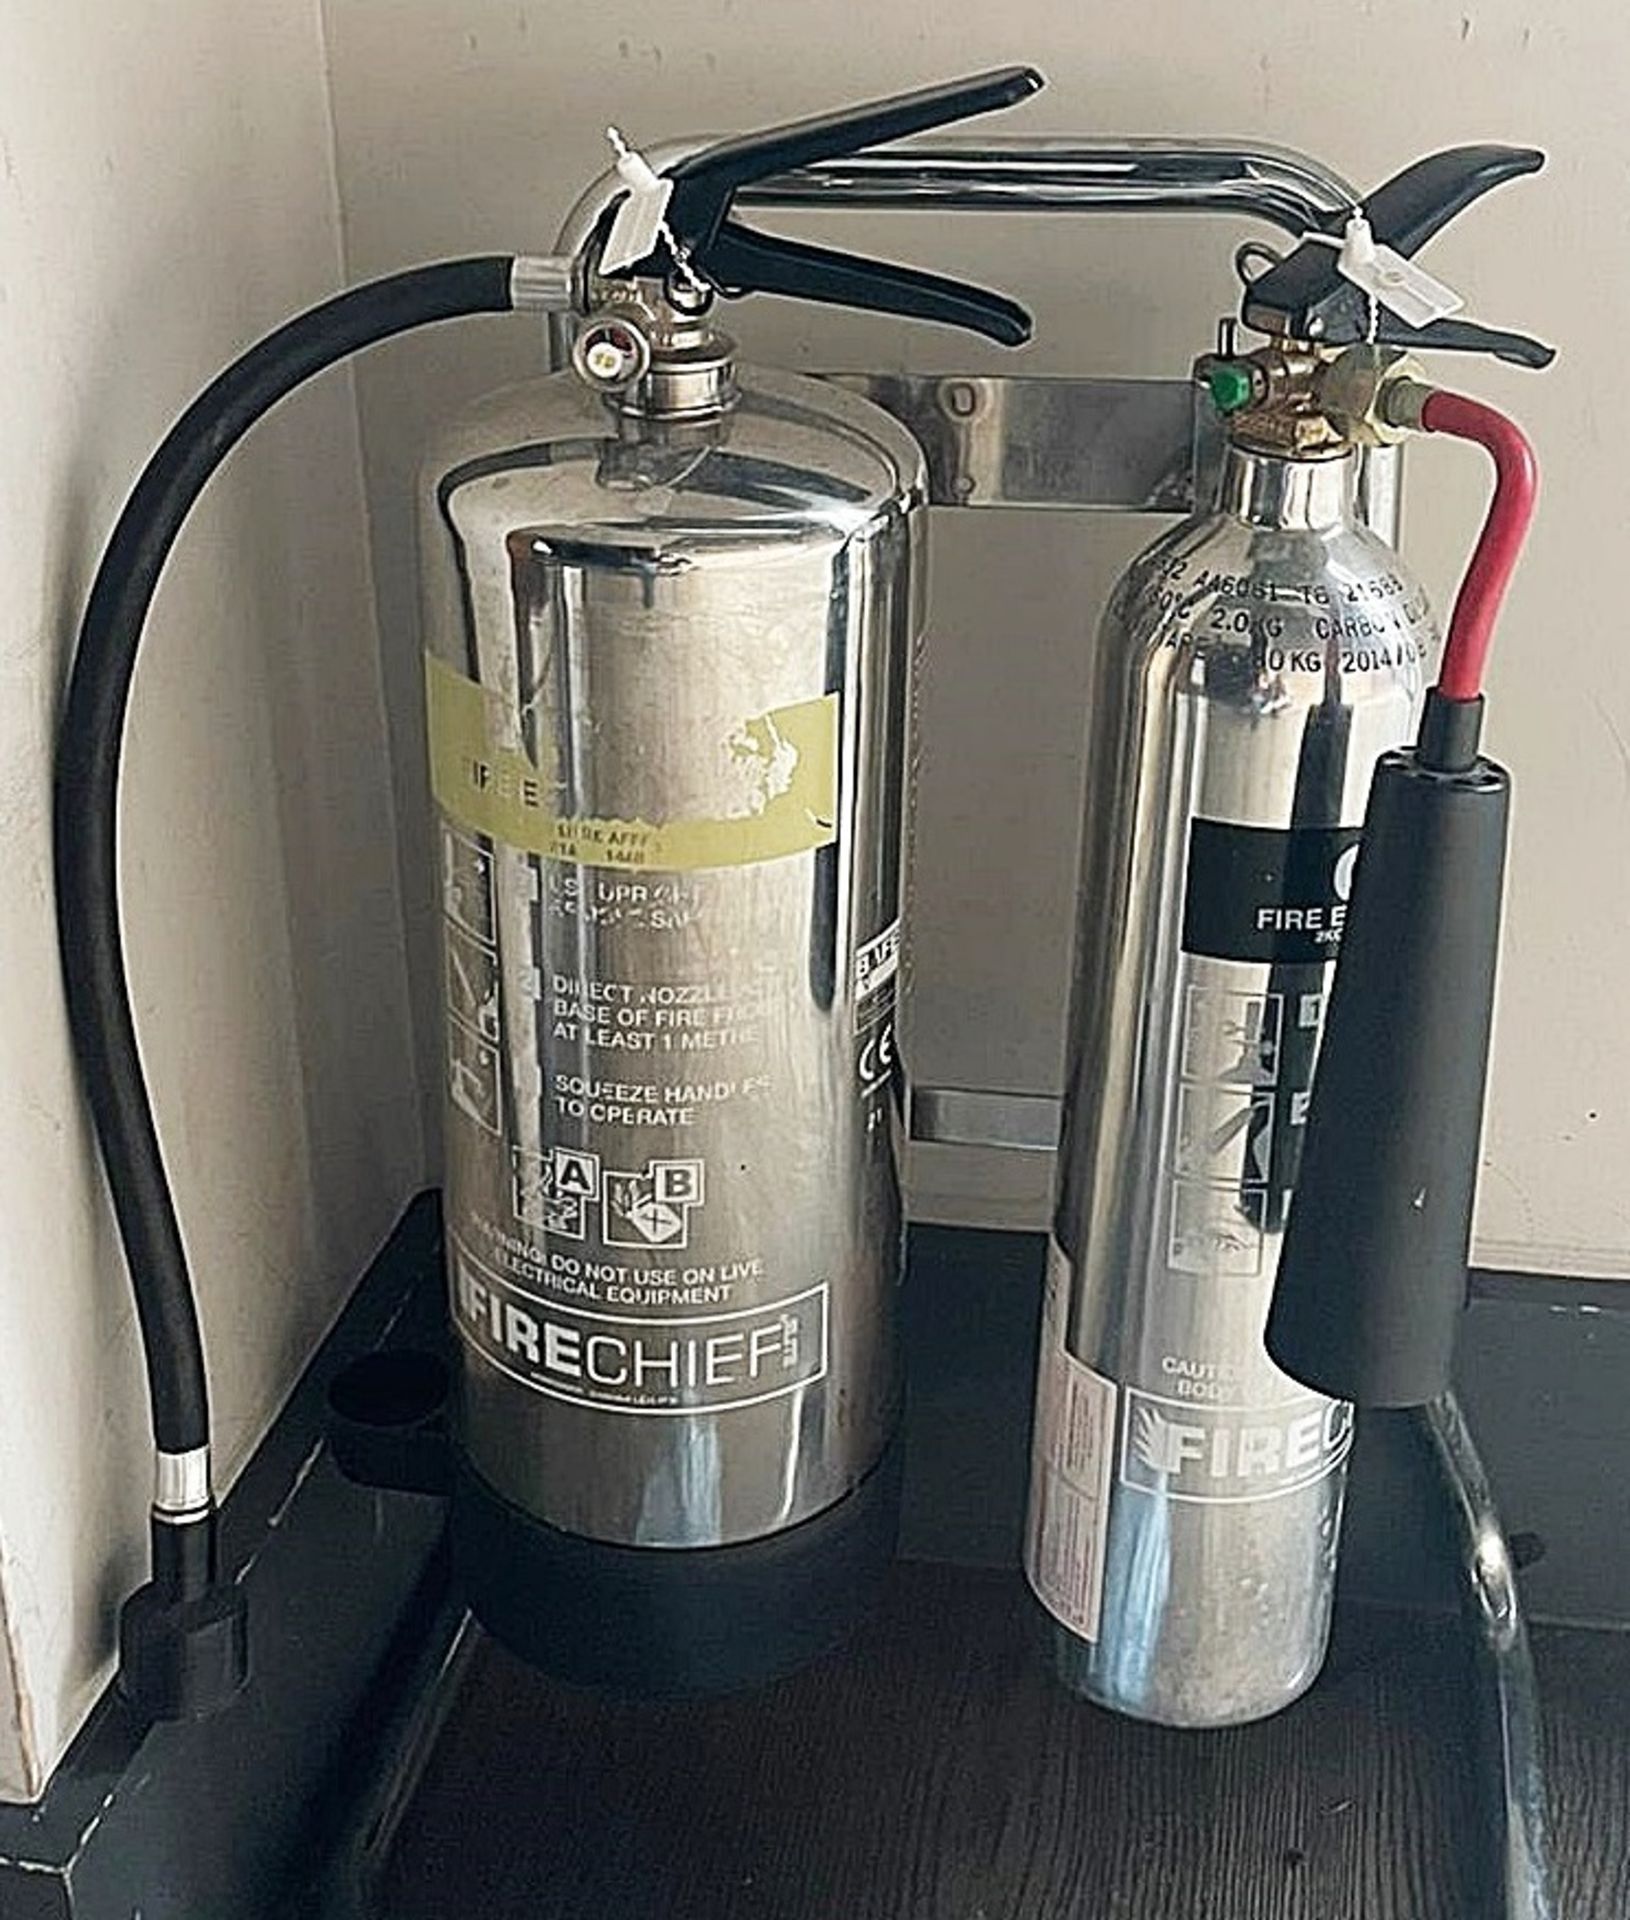 4 x Chrome Fire Extinguishers With Stands - CL674 - Location: Telford, TF3Collections:This item is